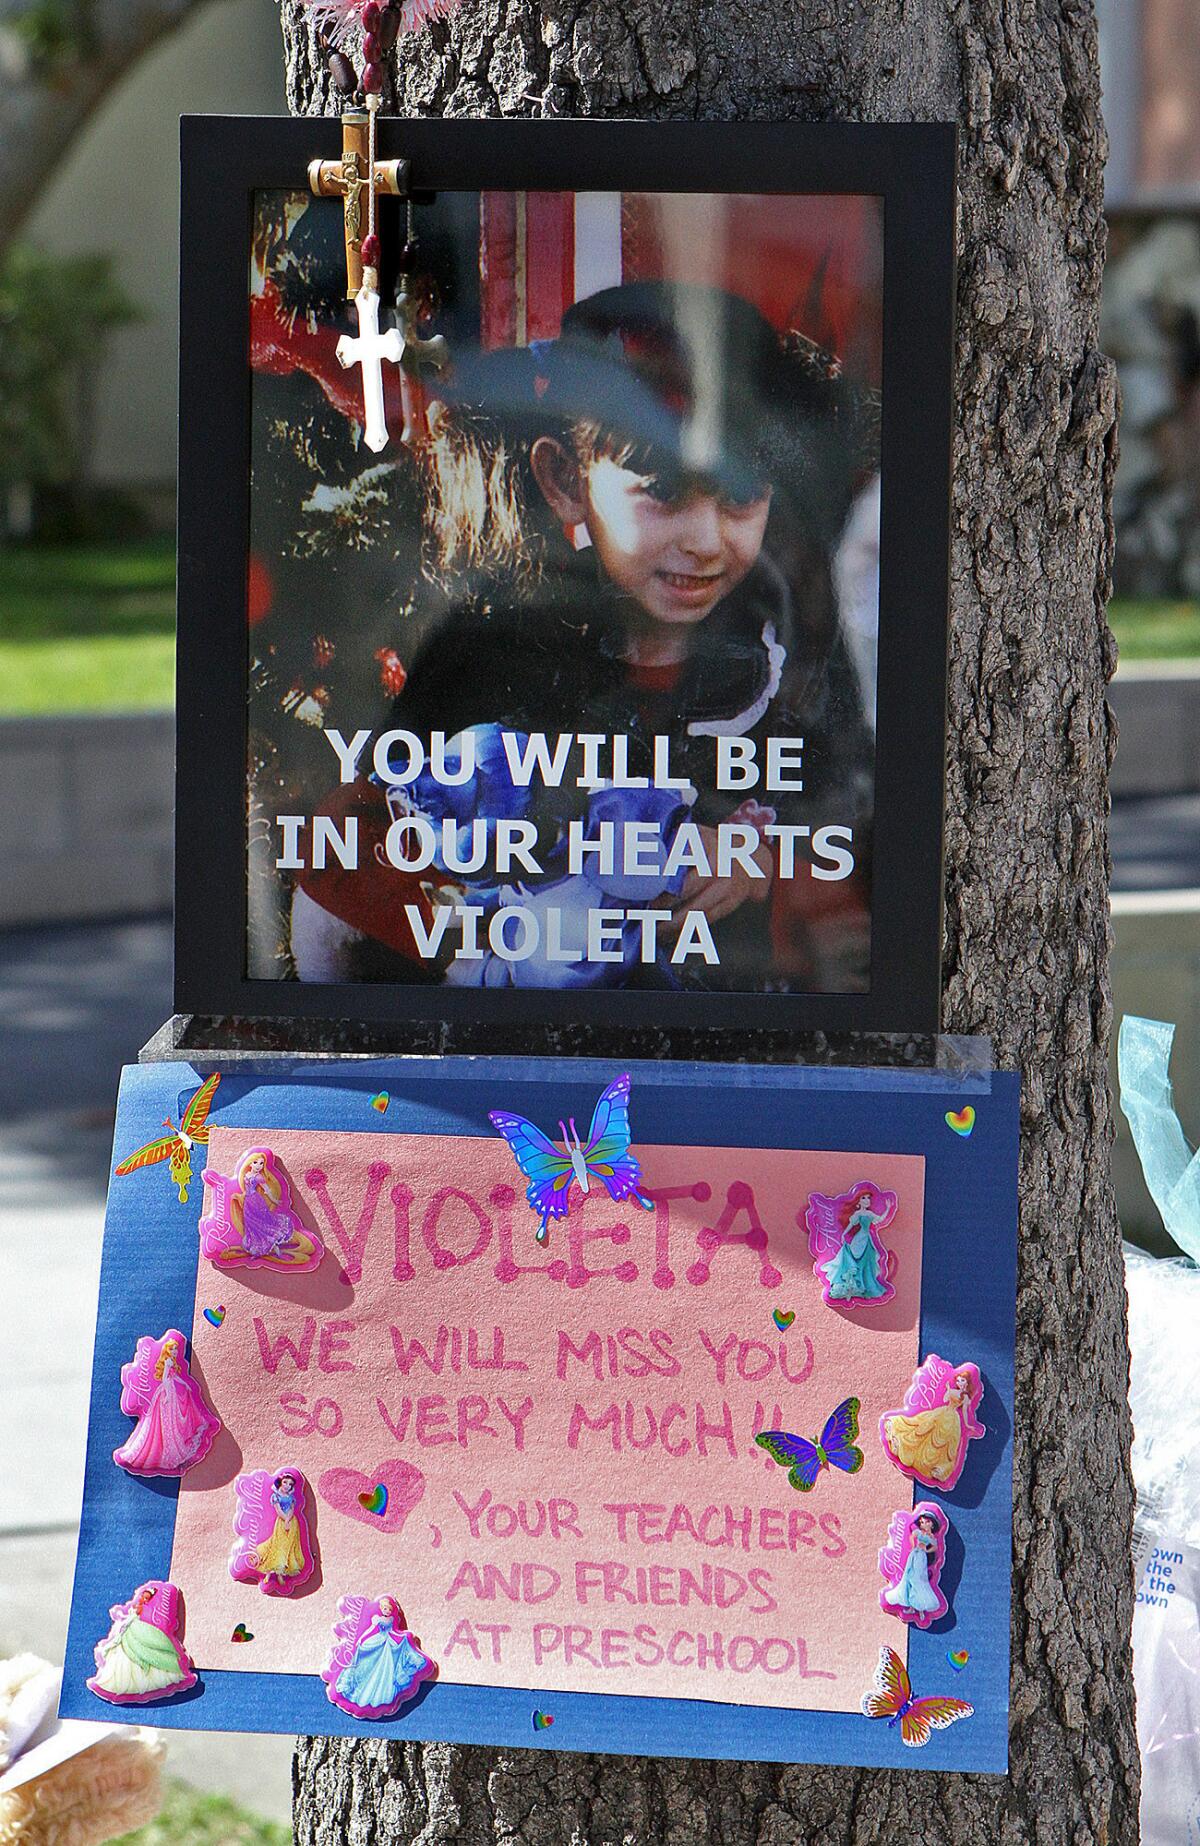 An image of 4-year-old Violeta Khachatoorians on a tree at a memorial for her in Glendale on Monday, March 9, 2015. Violeta was killed Friday, March 6 by a hit-and-run driver who turned himself in the next day.